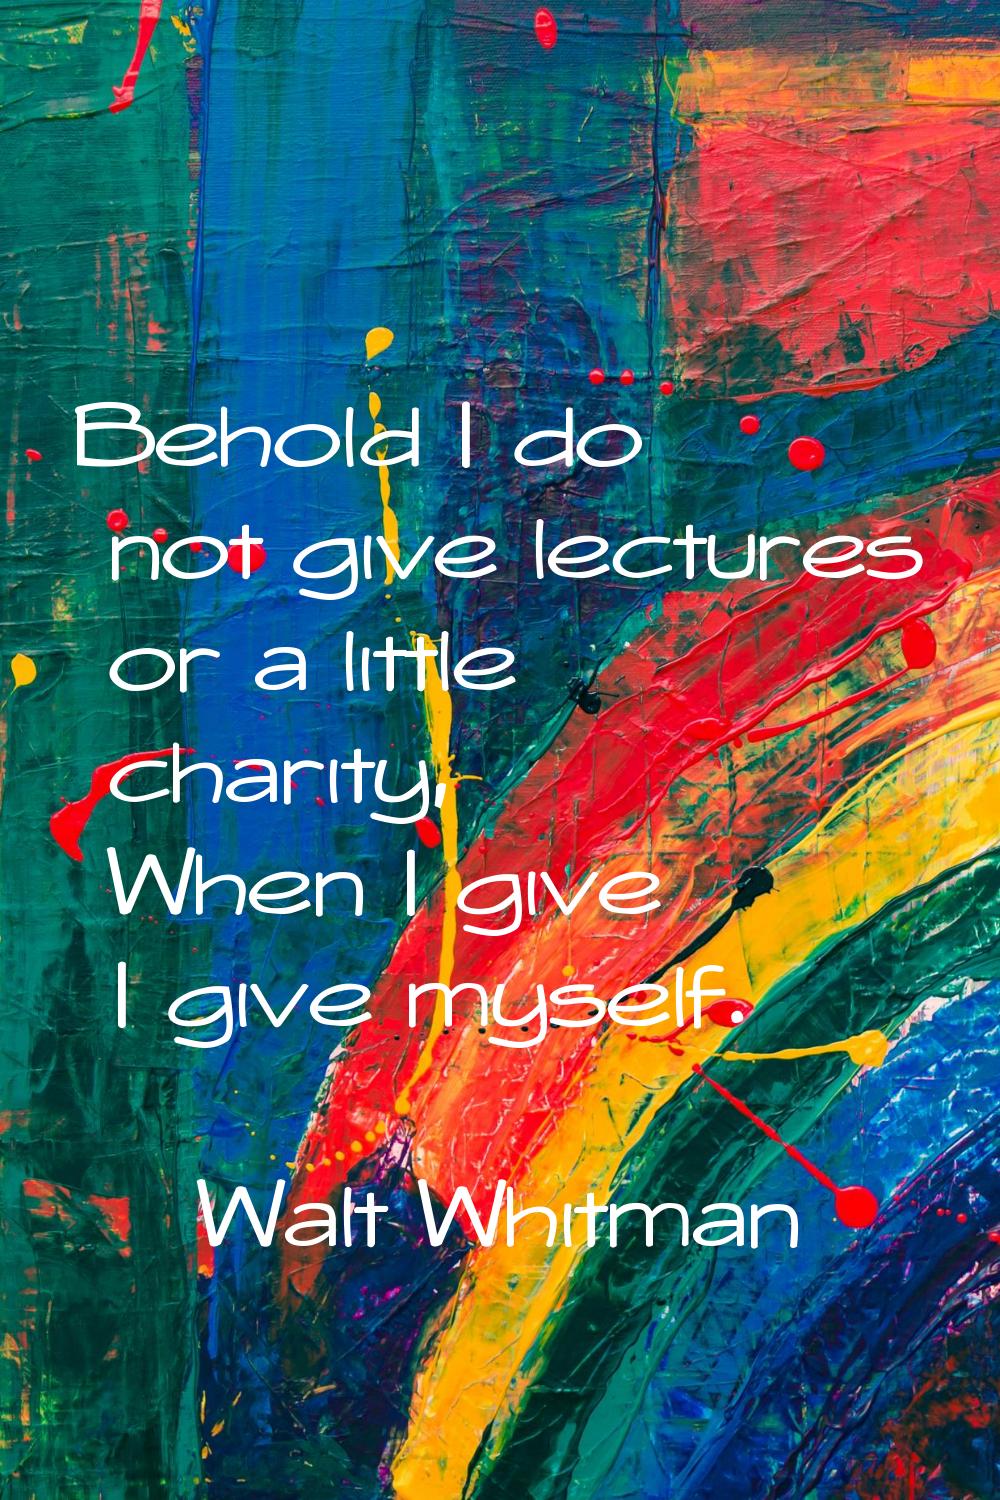 Behold I do not give lectures or a little charity, When I give I give myself.